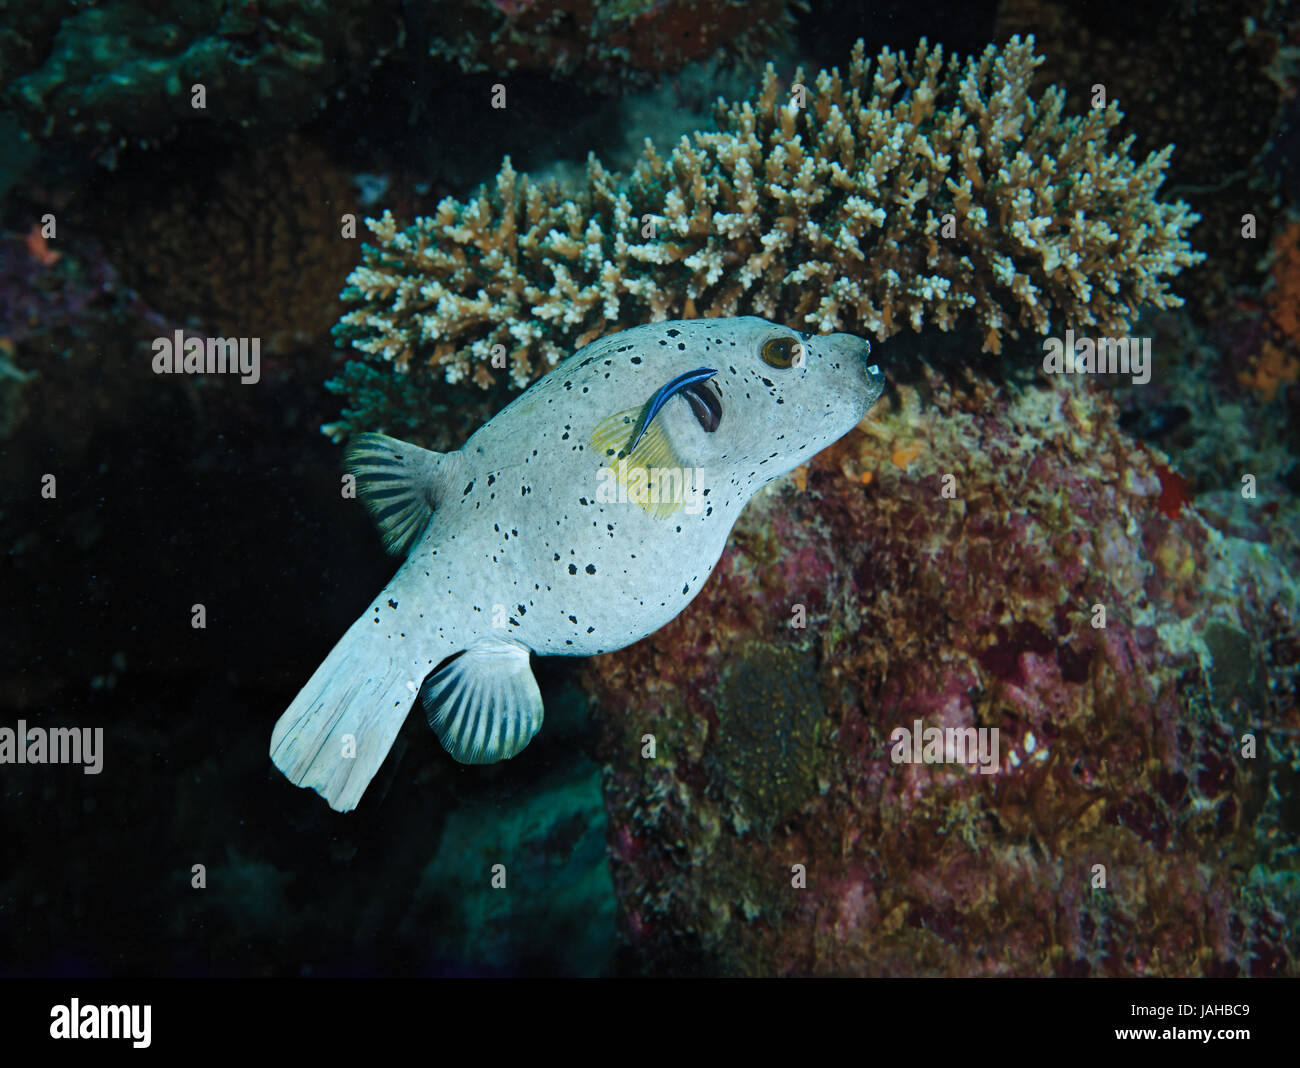 Blackspotted Puffer Fish or Dog-faced Puffer, Arothron nigropunctatus, with cleaner wrasse on coral reef in Maldives Stock Photo